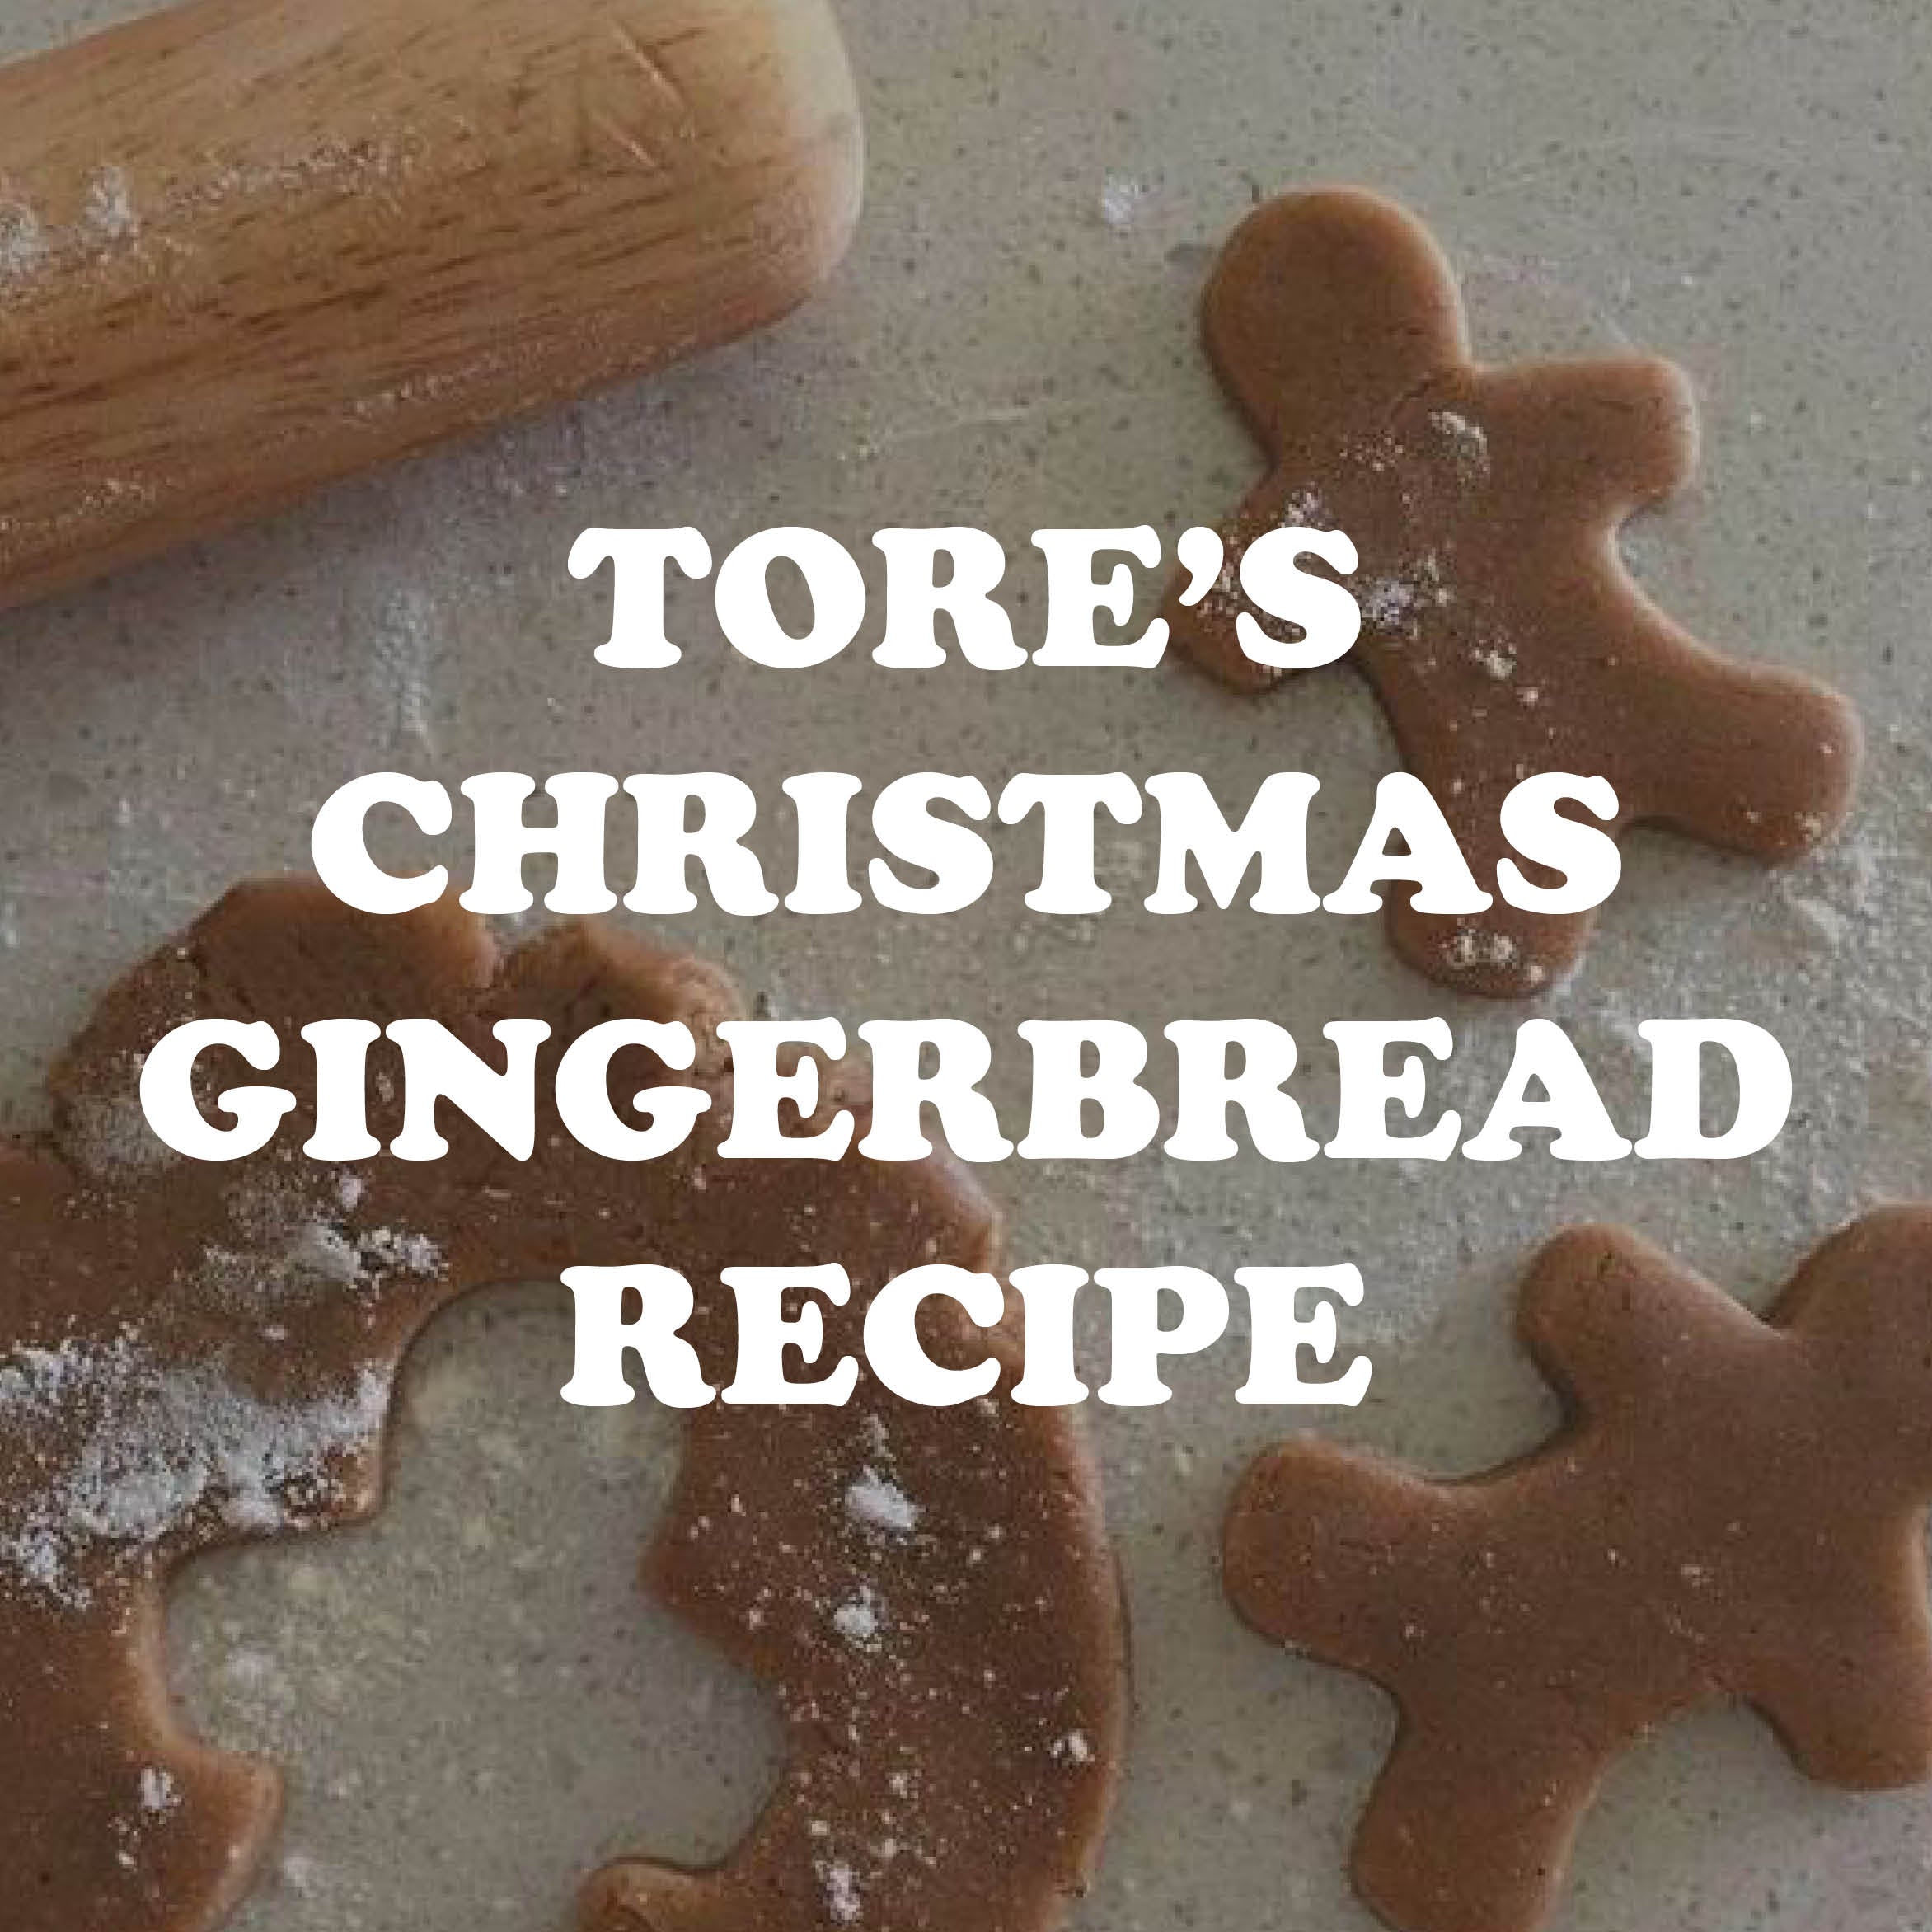 Tore's Christmas Gingerbread Recipe